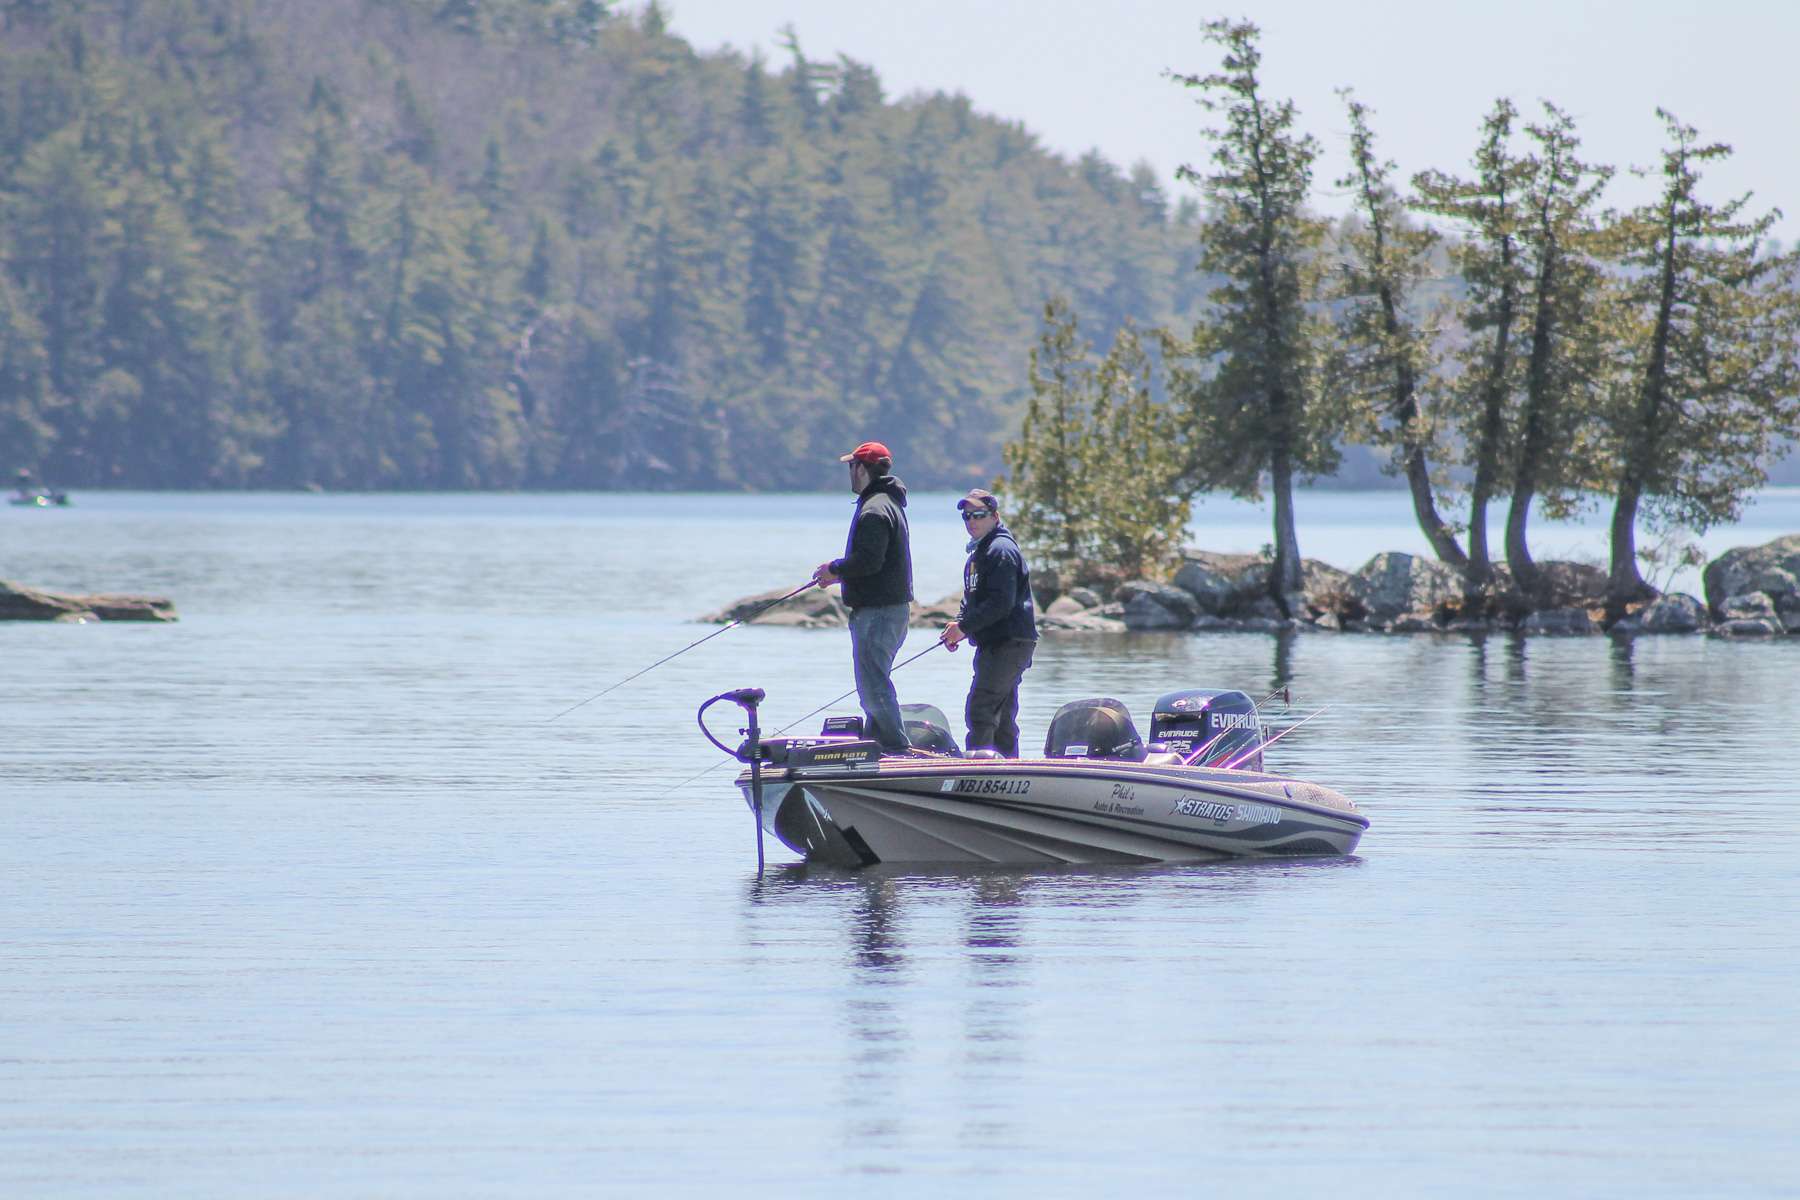 <h4>18. Great Pond, Maine</h4>
  [8,533 acres] Smallmouth far outnumber largemouth at Great Pond, and there are plenty of heavyweights, points out Hoehlein, of Maineâs Inland Fish & Wildlife Bass Advisory Committee.<br><br>âAn open tournament last year produced a few 25-pound bags with a seven-fish limit,â Hoehlein said. âThat was a little low for this lake. Typically, 25 percent of the field comes in with over 20 pounds.â
